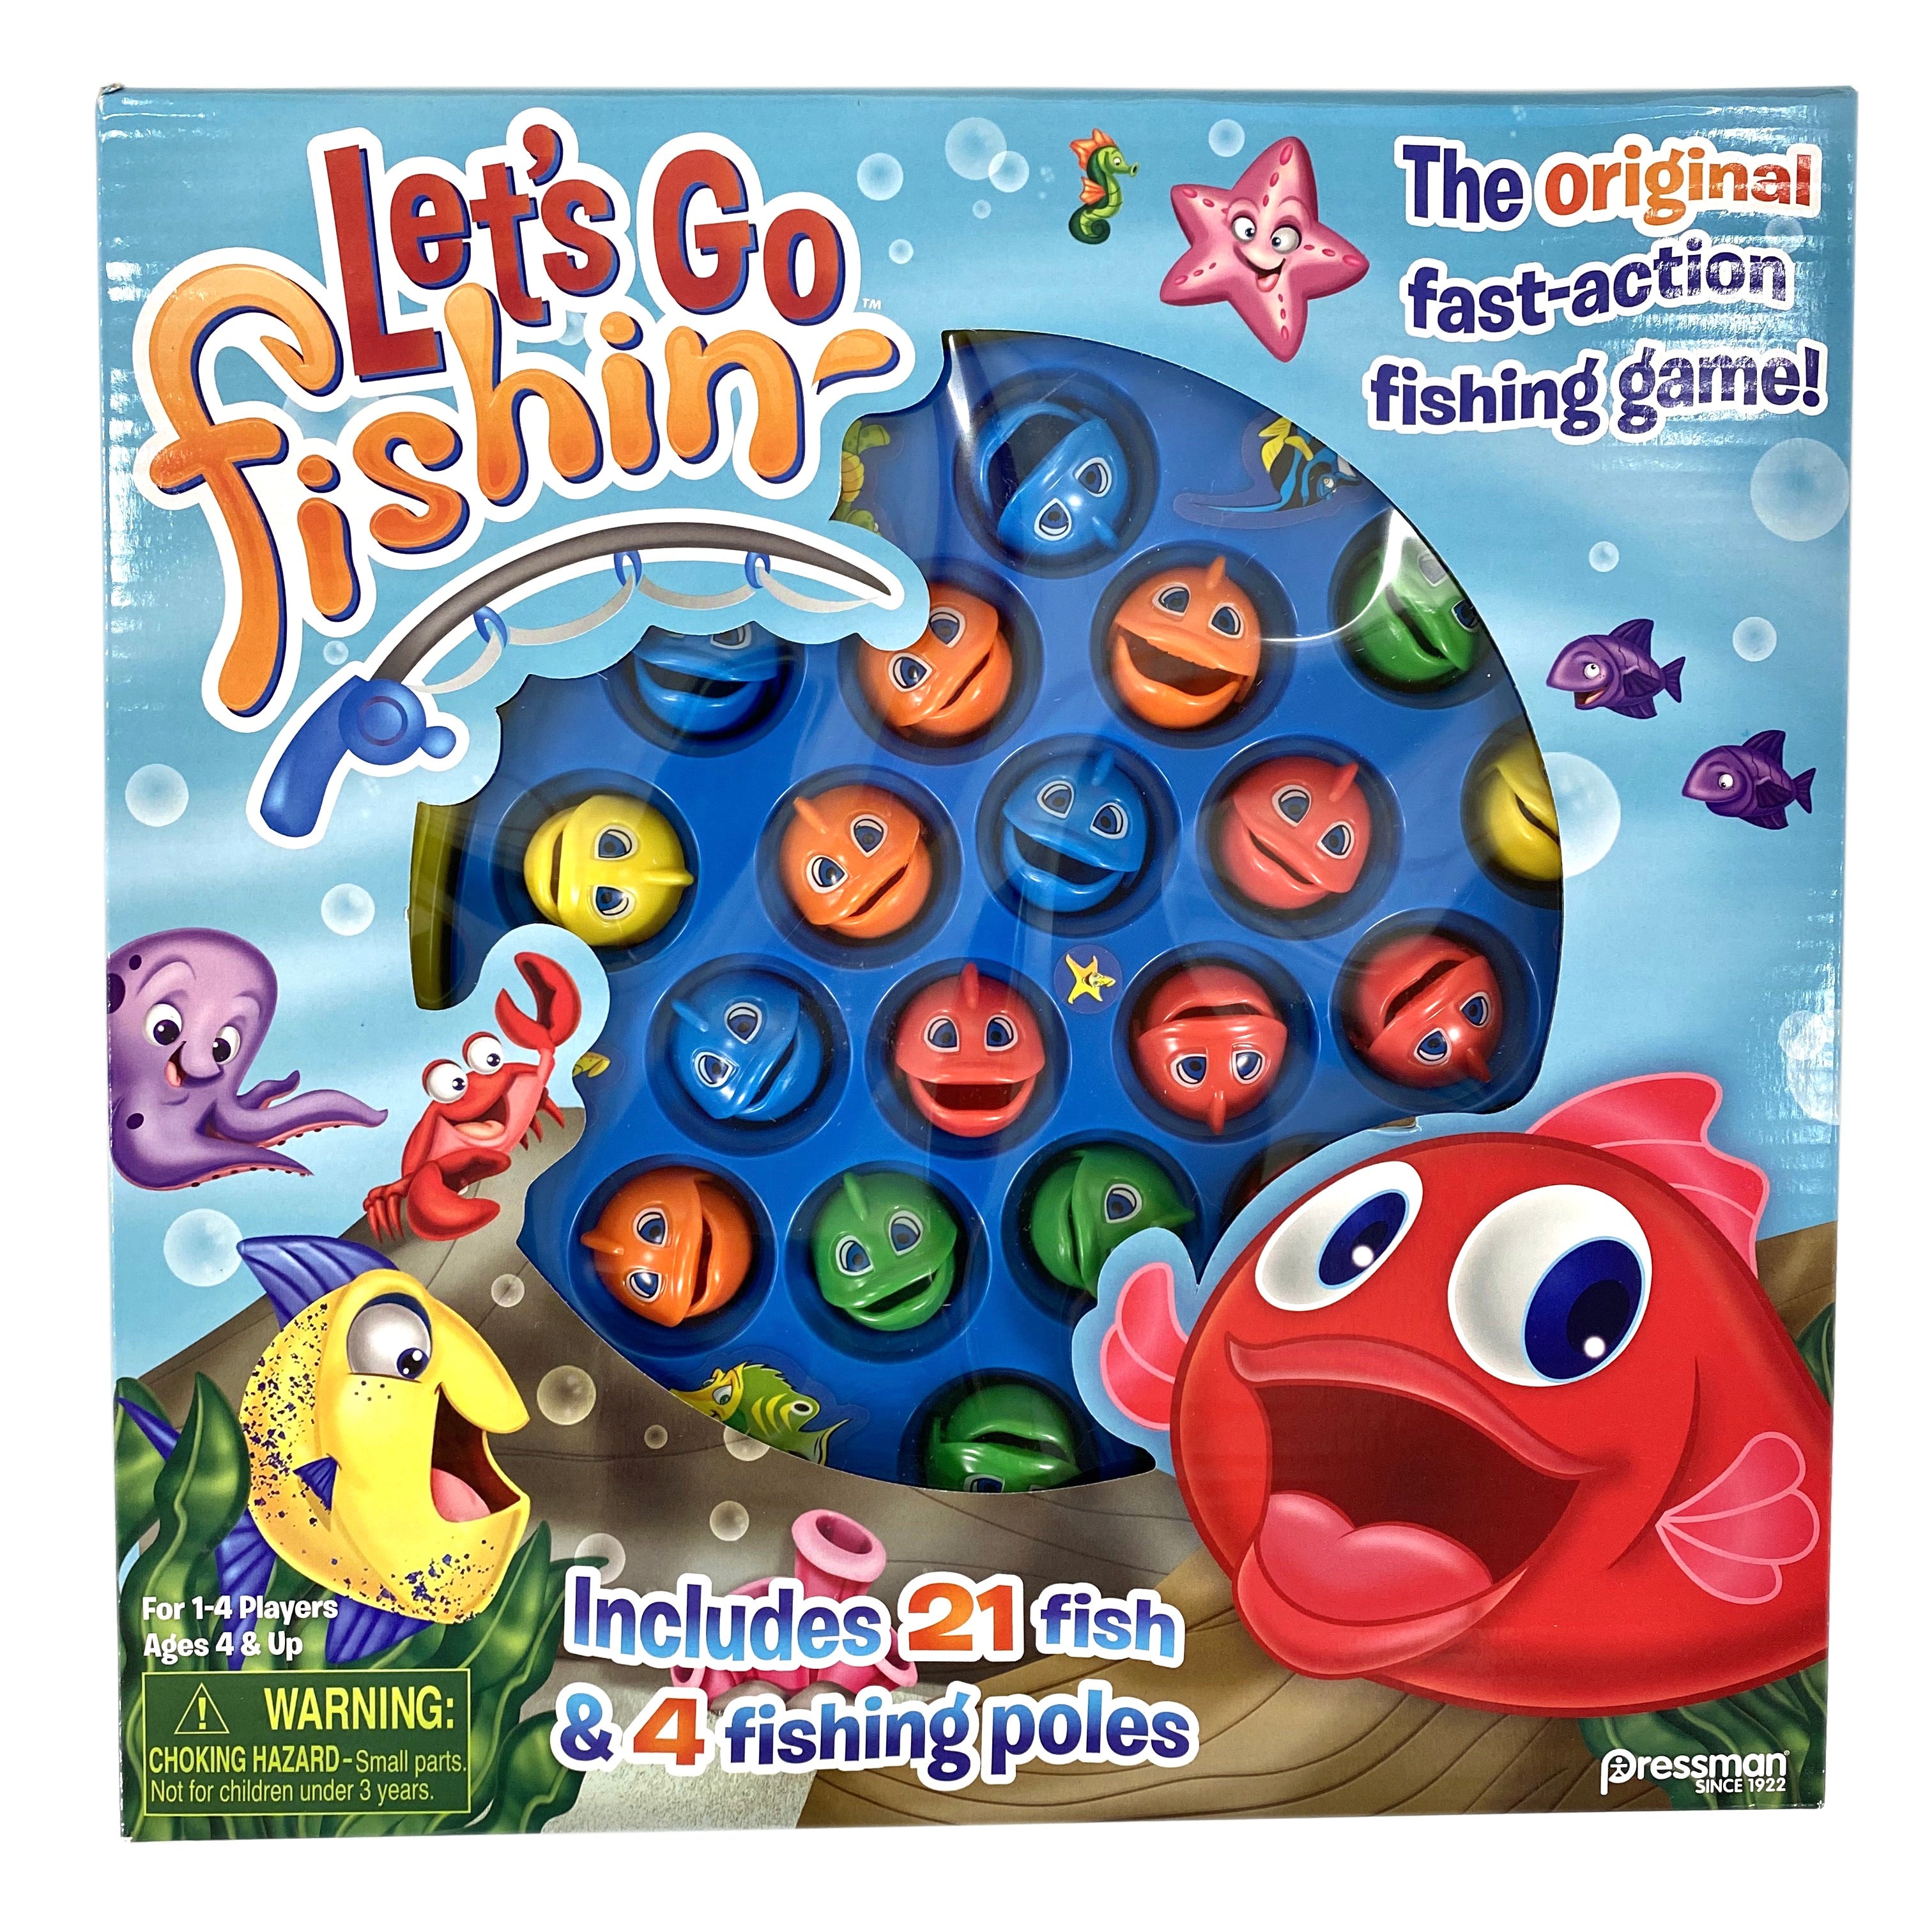 The Fishing Game - Products